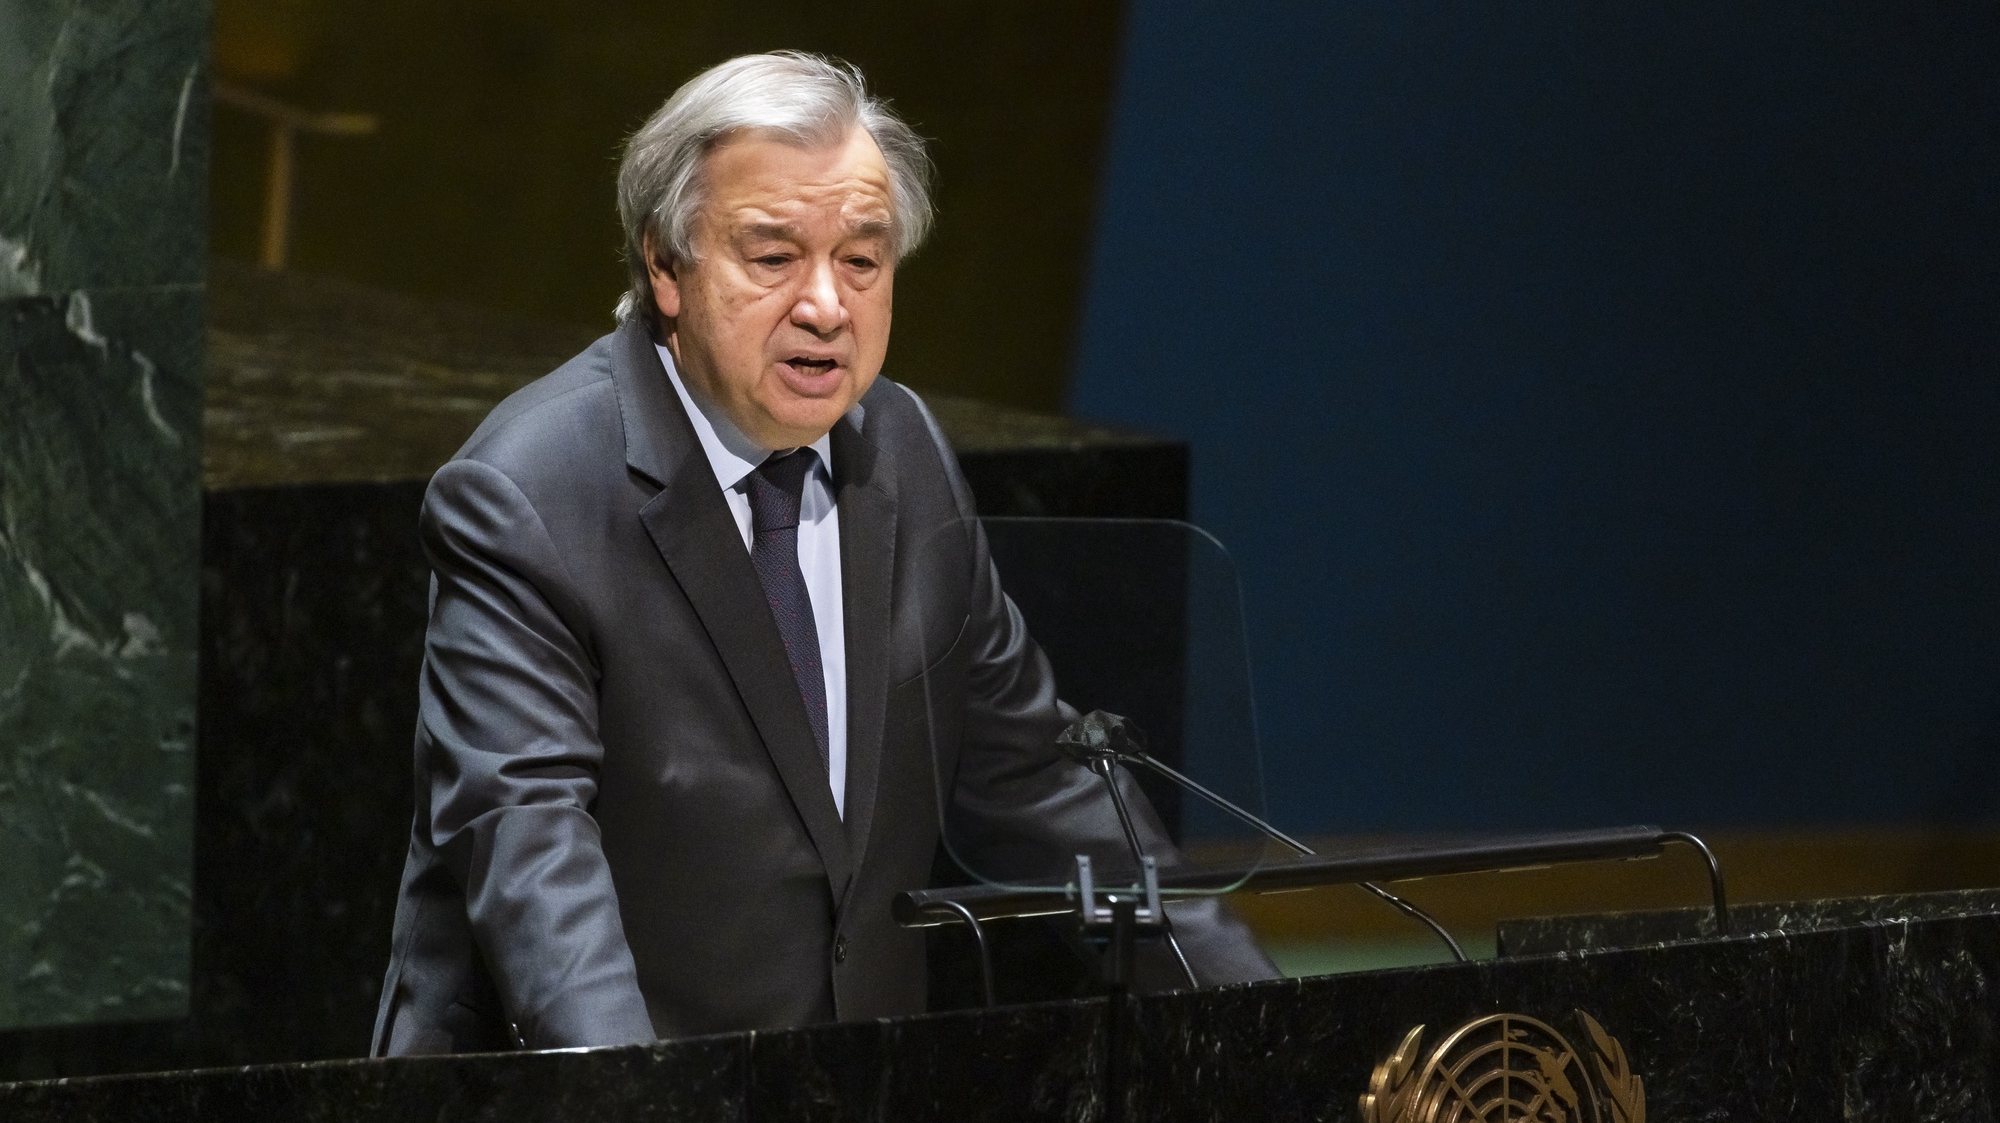 epa09792087 United Nations Secretary-General Antonio Guterres addresses an emergency session of the United Nations General Assembly called to consider a resolution condemning Russia&#039;s invasion of Ukraine at United Nations headquarters in New York, New York, USA, 28 February 2022. The UN Security Council voted on a similar resolution on 25 February but the measure was vetoed by Russia which wields that power as one of five permanent members of the council.  EPA/JUSTIN LANE